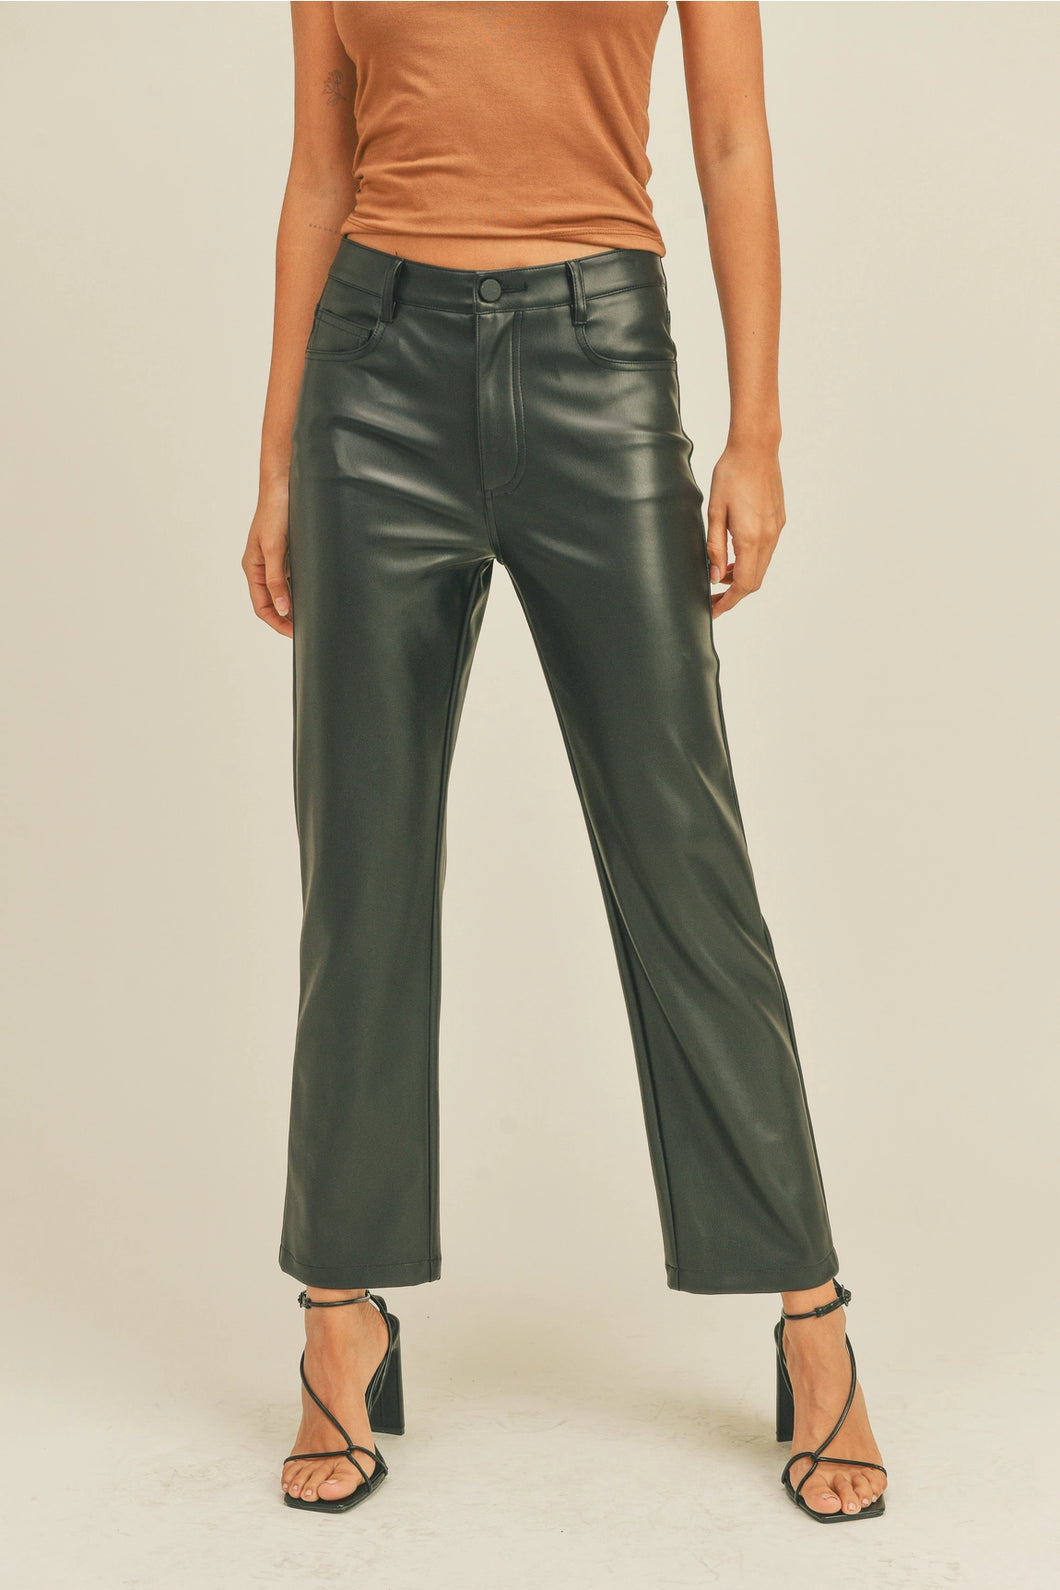 Sassy Faux Leather Pants